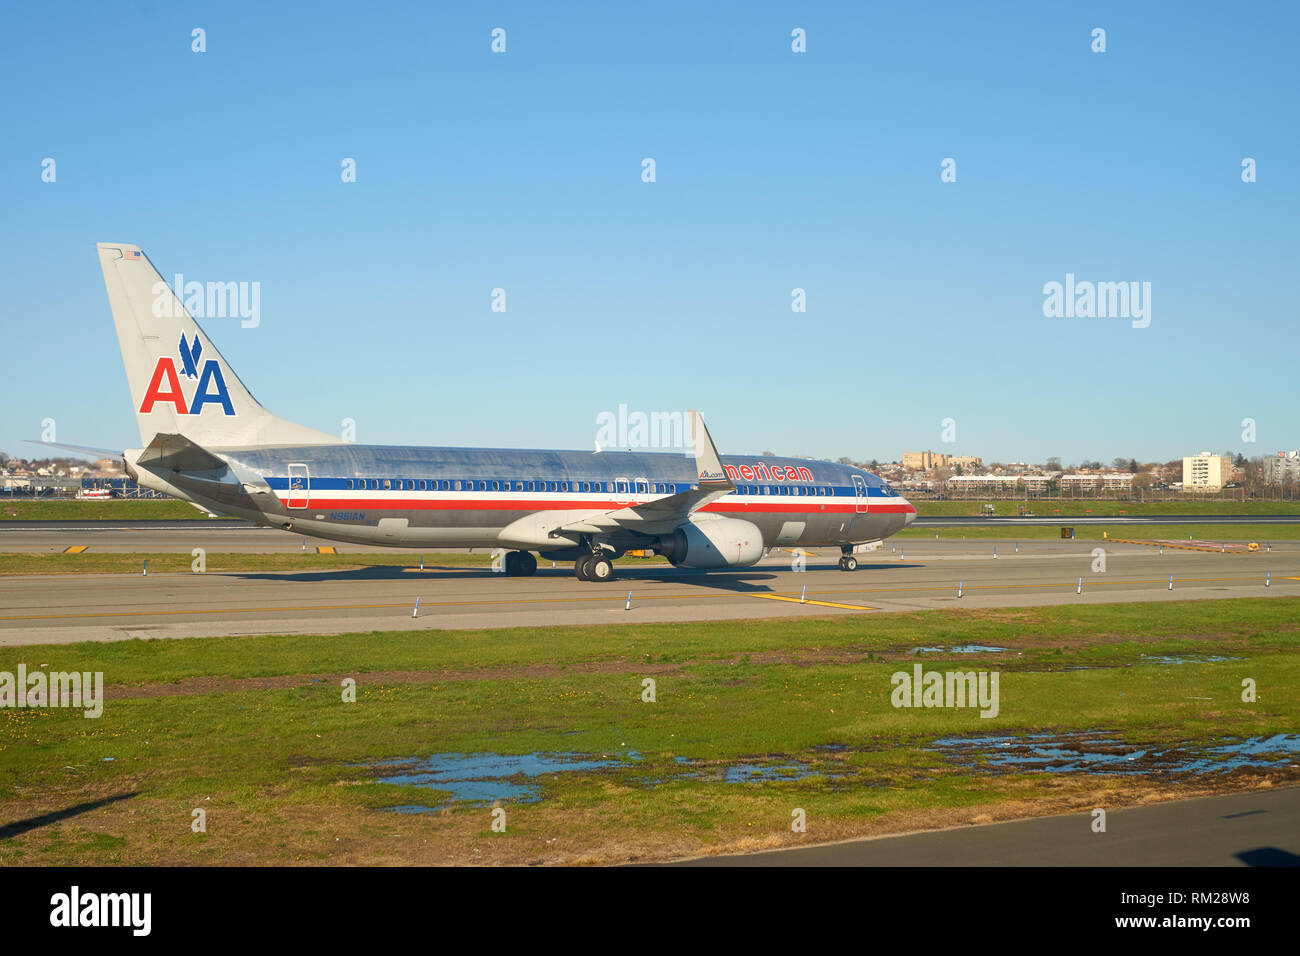 NEW YORK - APRIL 05, 2016: airplane at LaGuardia Airport. LaGuardia Airport is an international airport located in the northern part of Queens, New Yo Stock Photo